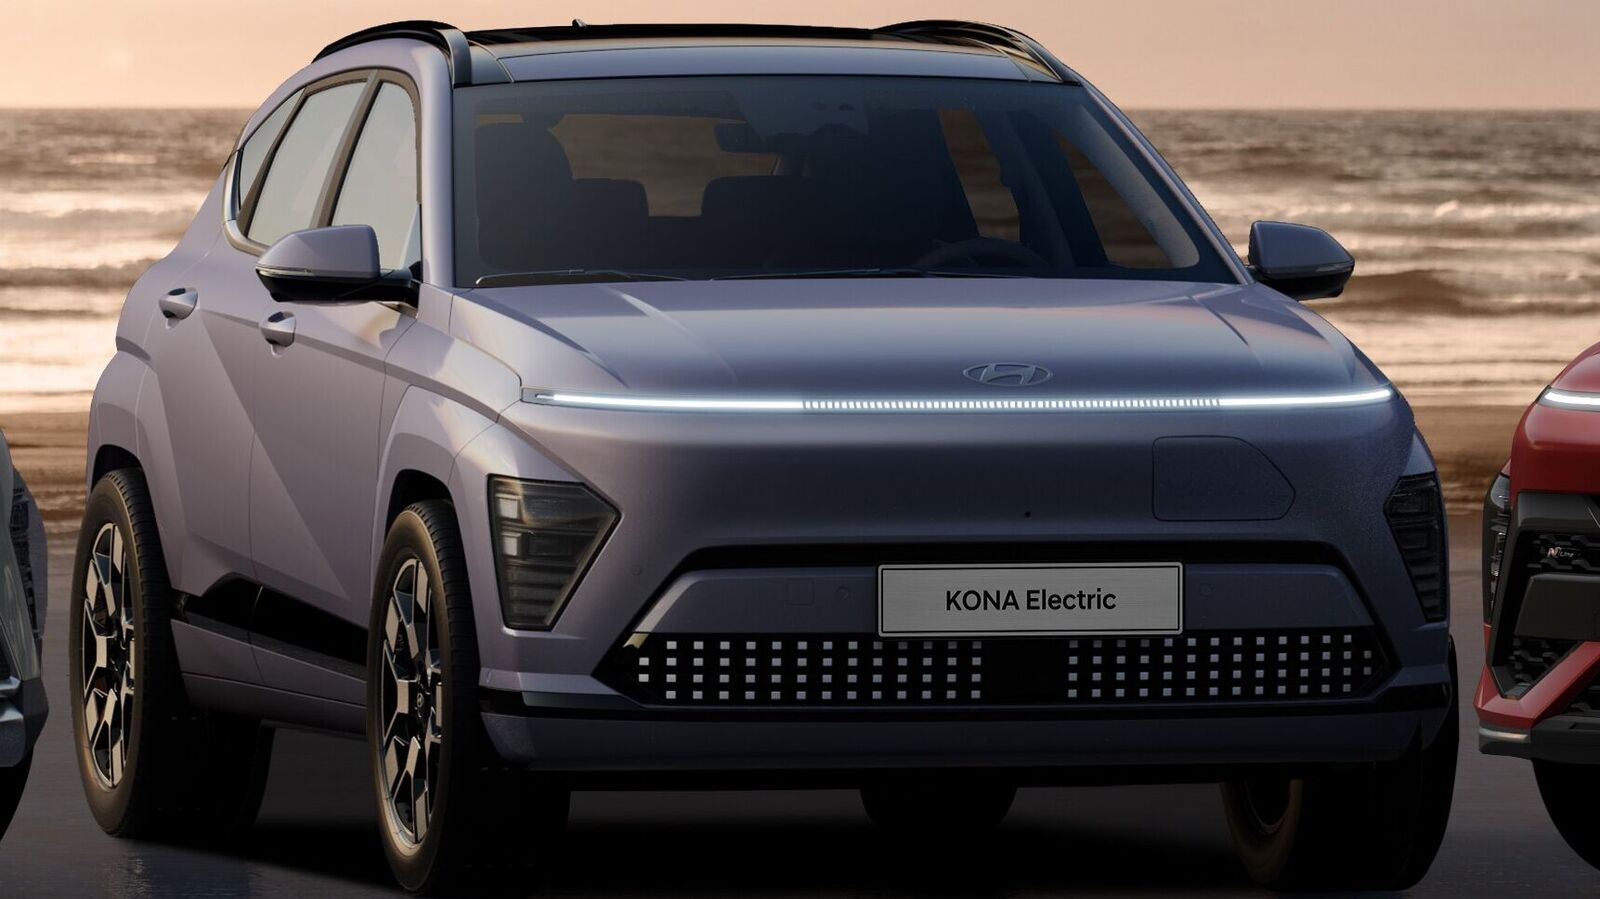 New Hyundai Kona Electric gets two battery pack options, promises up to